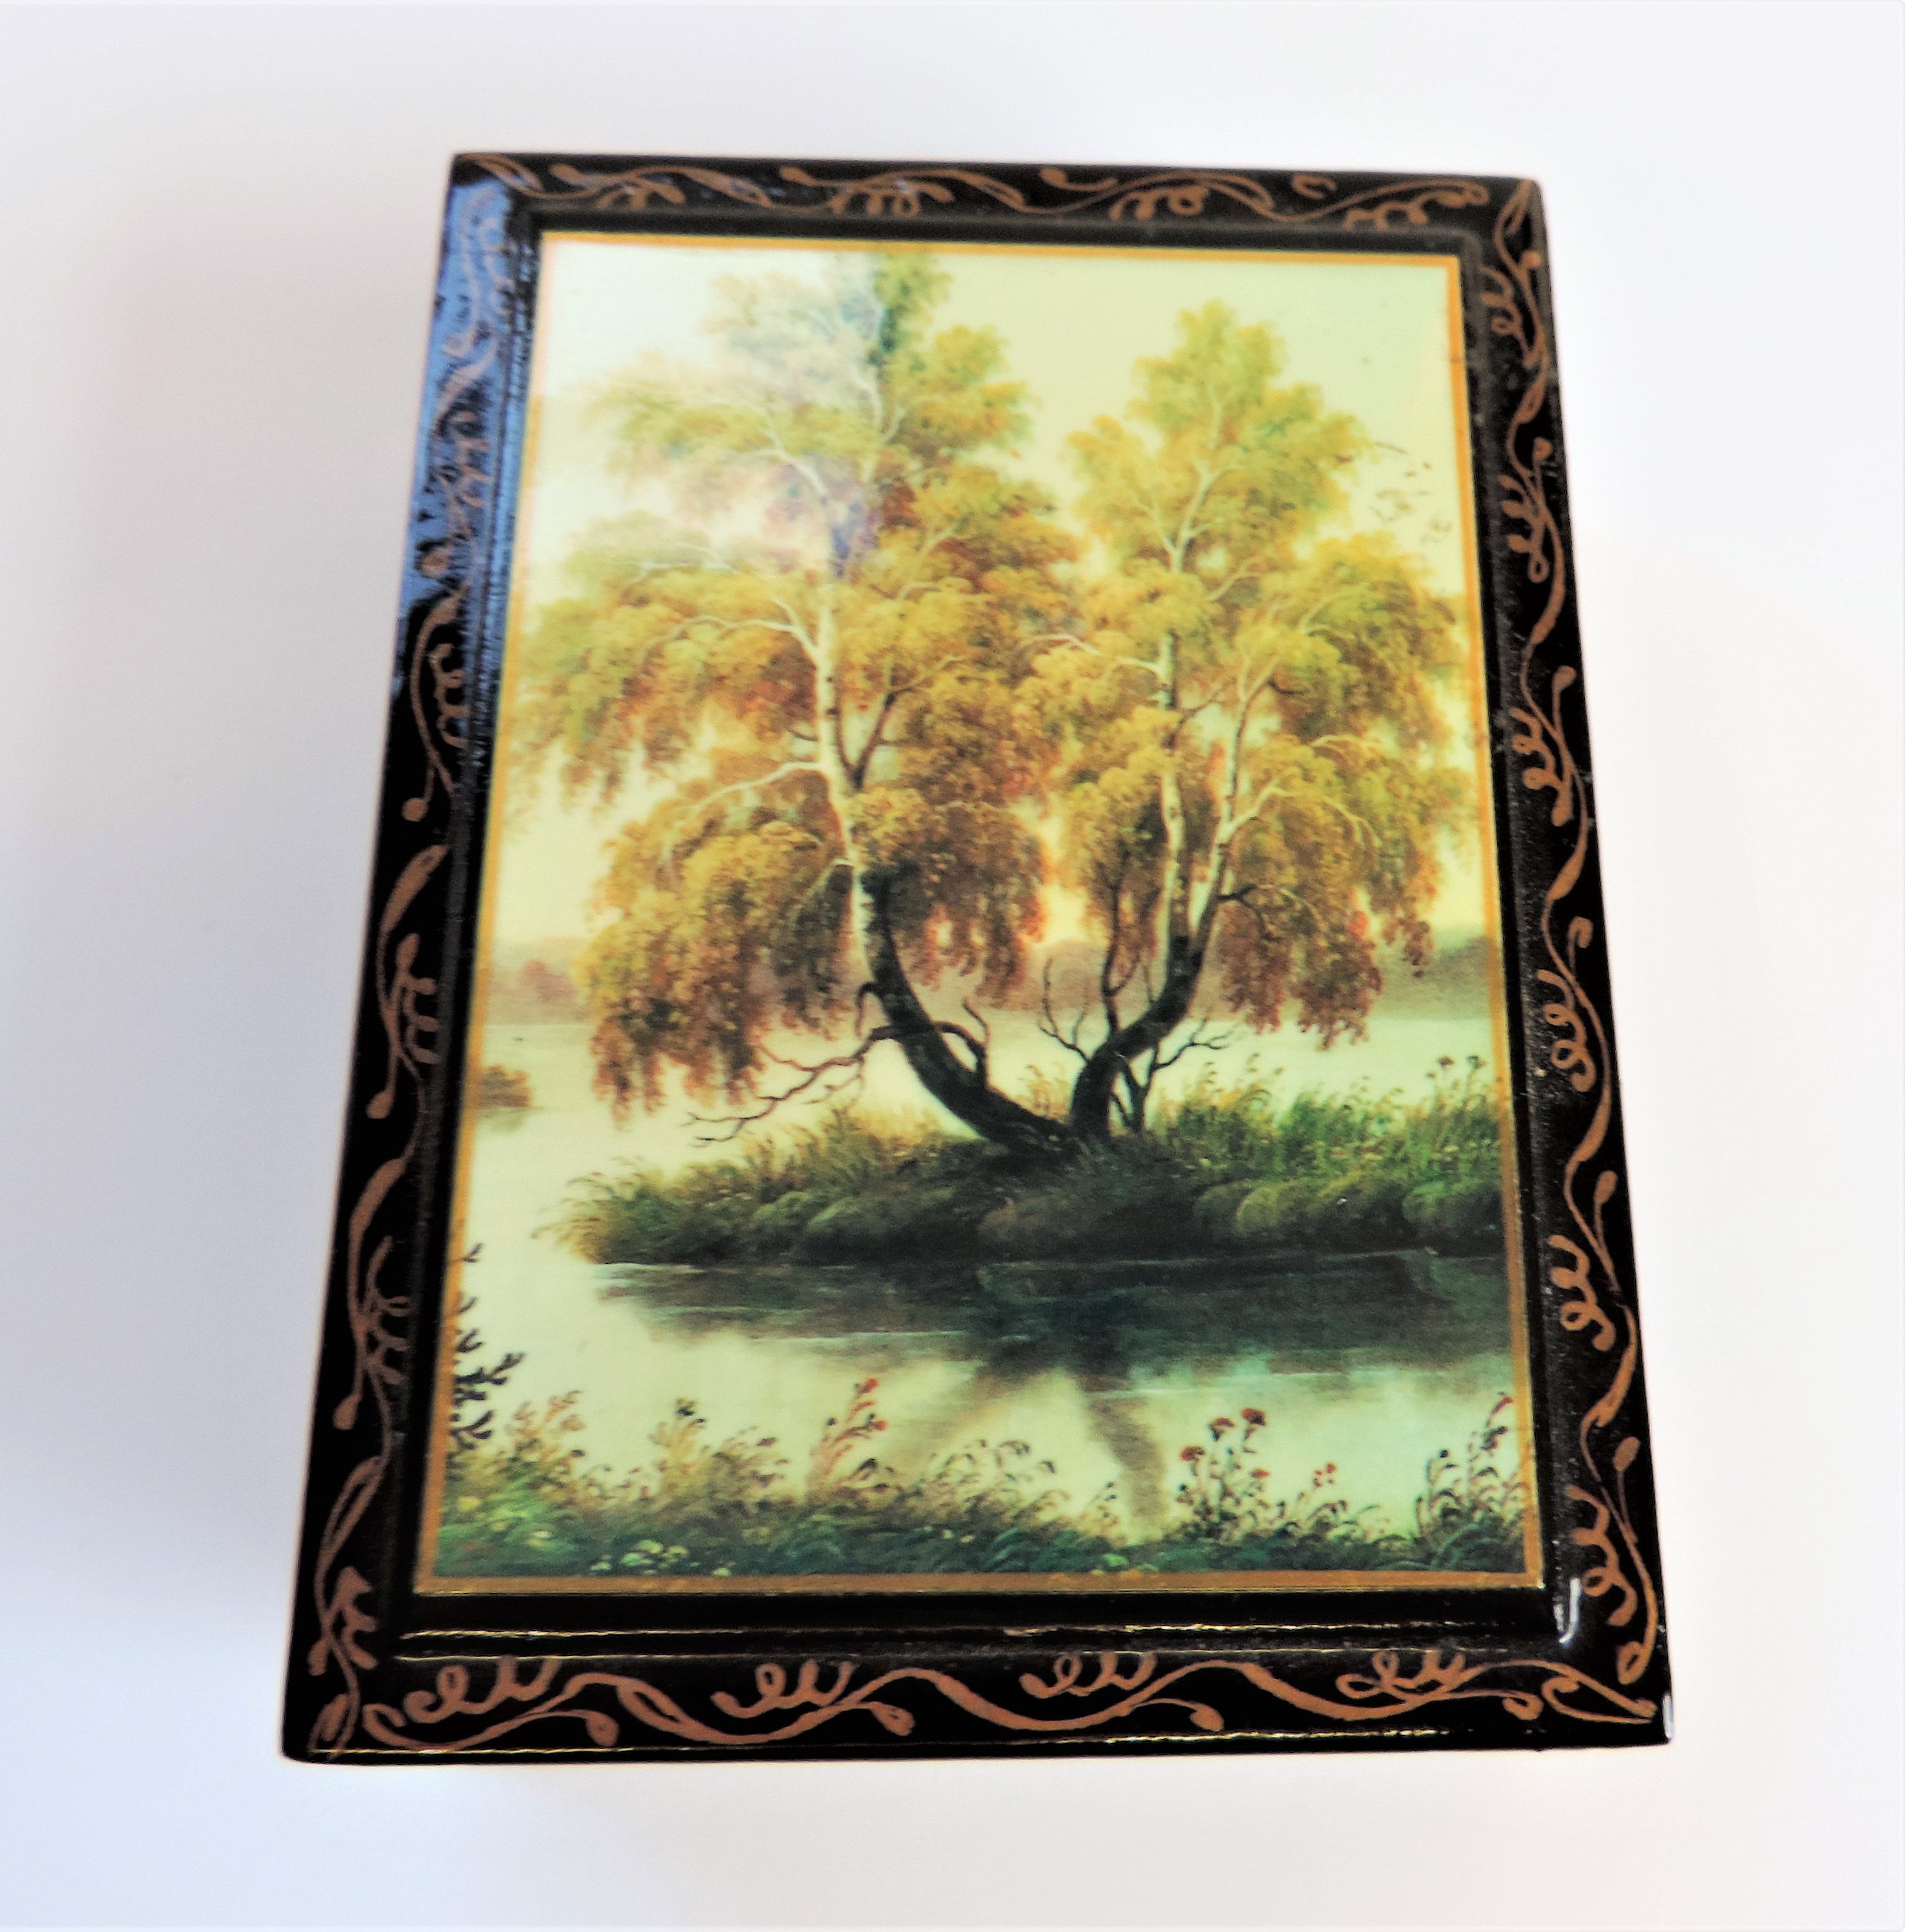 Vintage Russian Hand Painted Lacquer Box Signed by Artist - Image 5 of 5